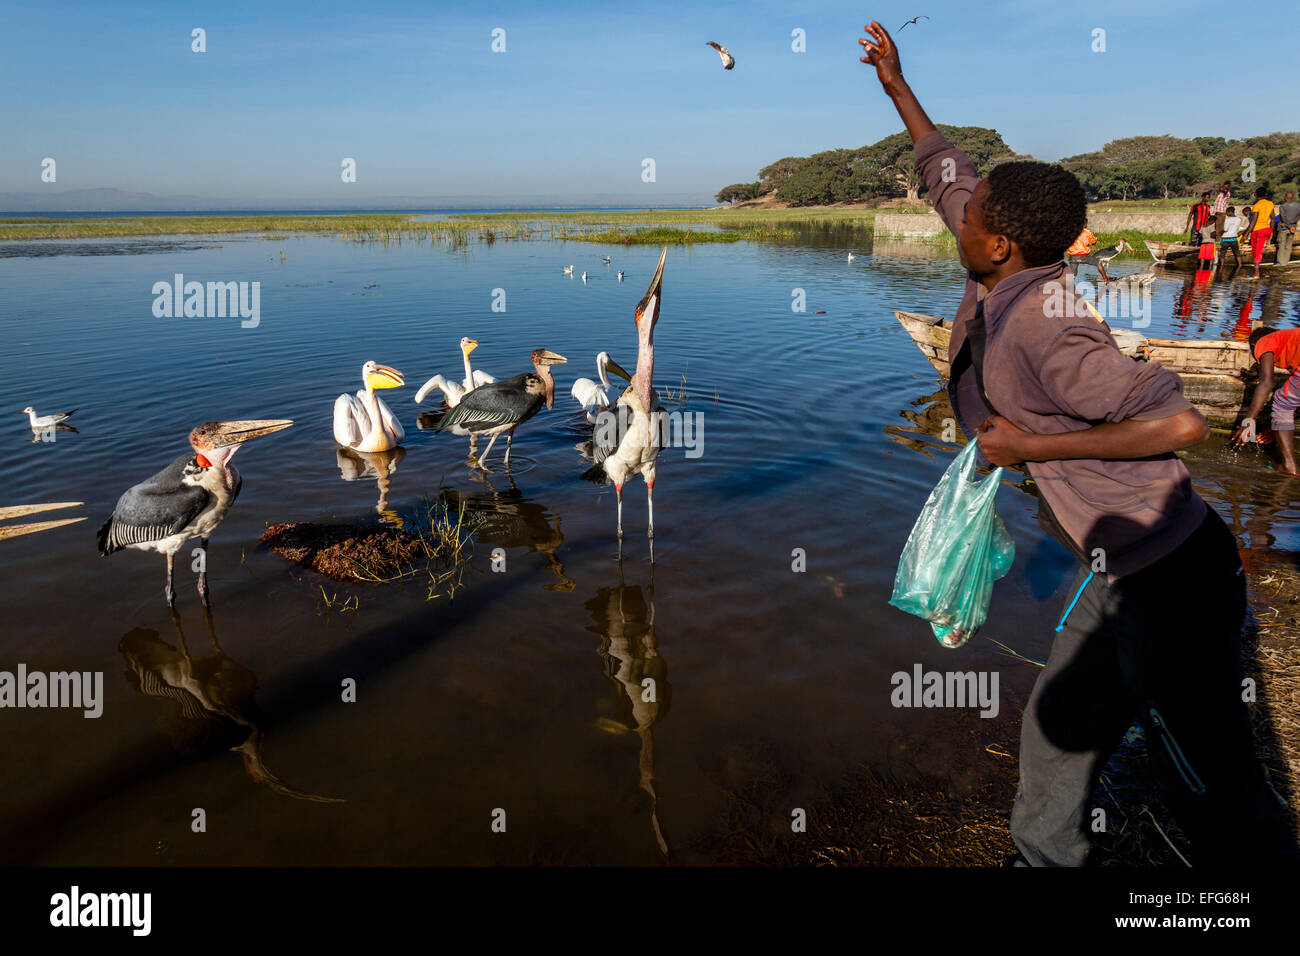 A Local Boy Feeds Marabou Storks and Pelicans With Fish Pieces, The Fish Market, Lake Hawassa, Hawassa, Ethiopia Stock Photo